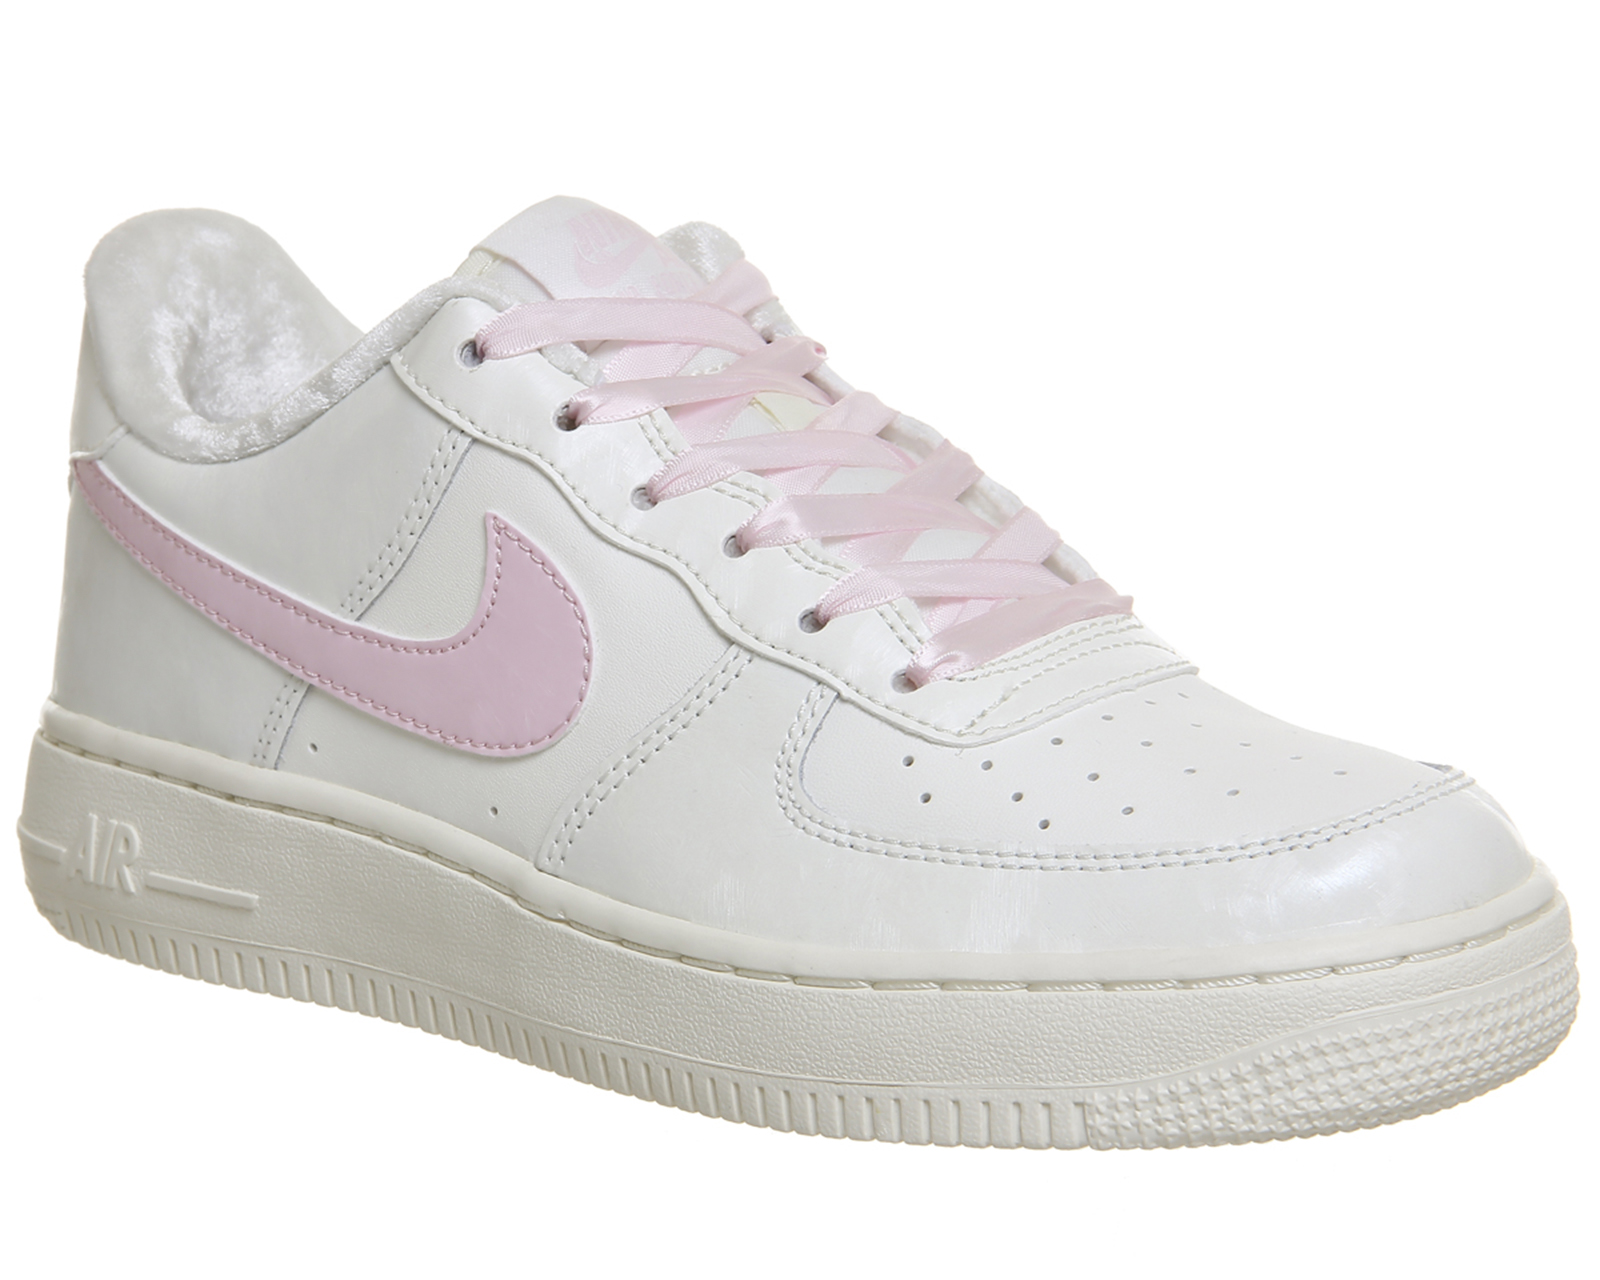 white & pink air force 1 trainers